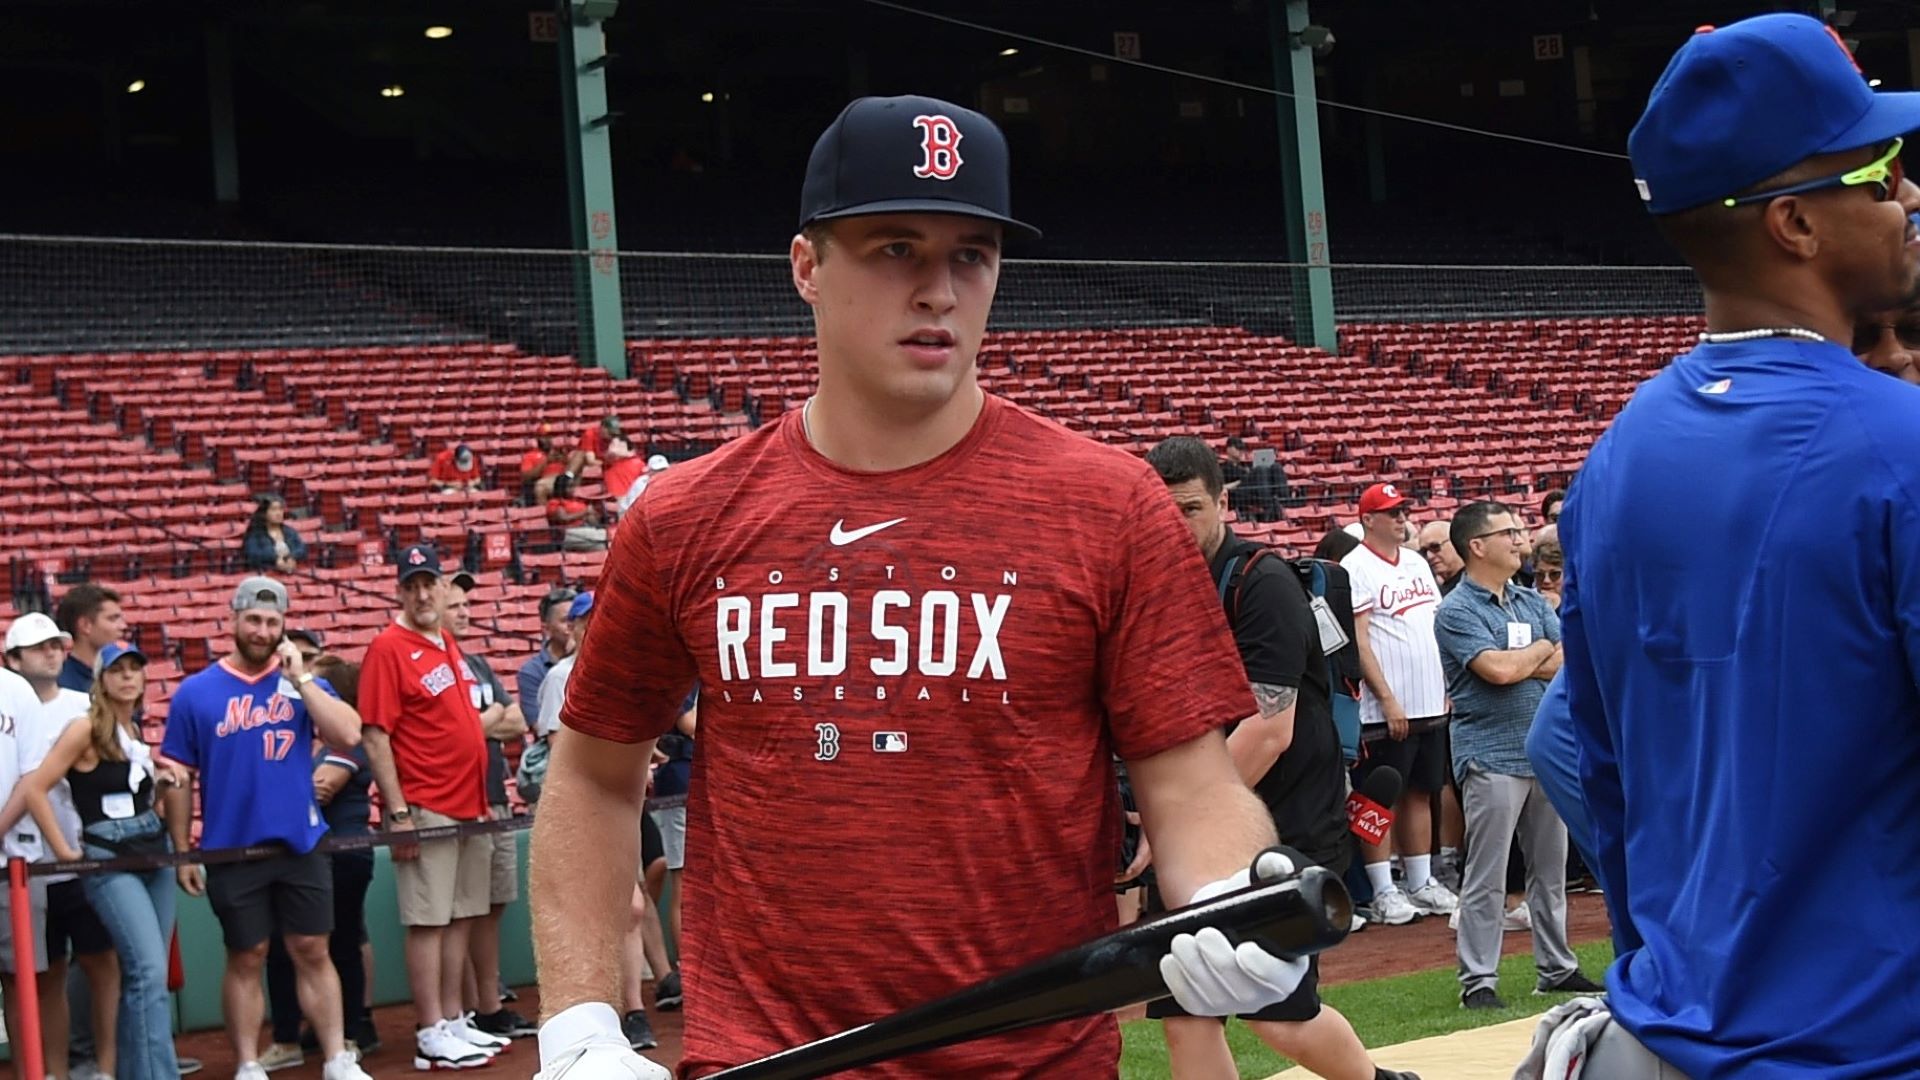 Red Sox' first-round pick Kyle Teel batting .571 to start pro career